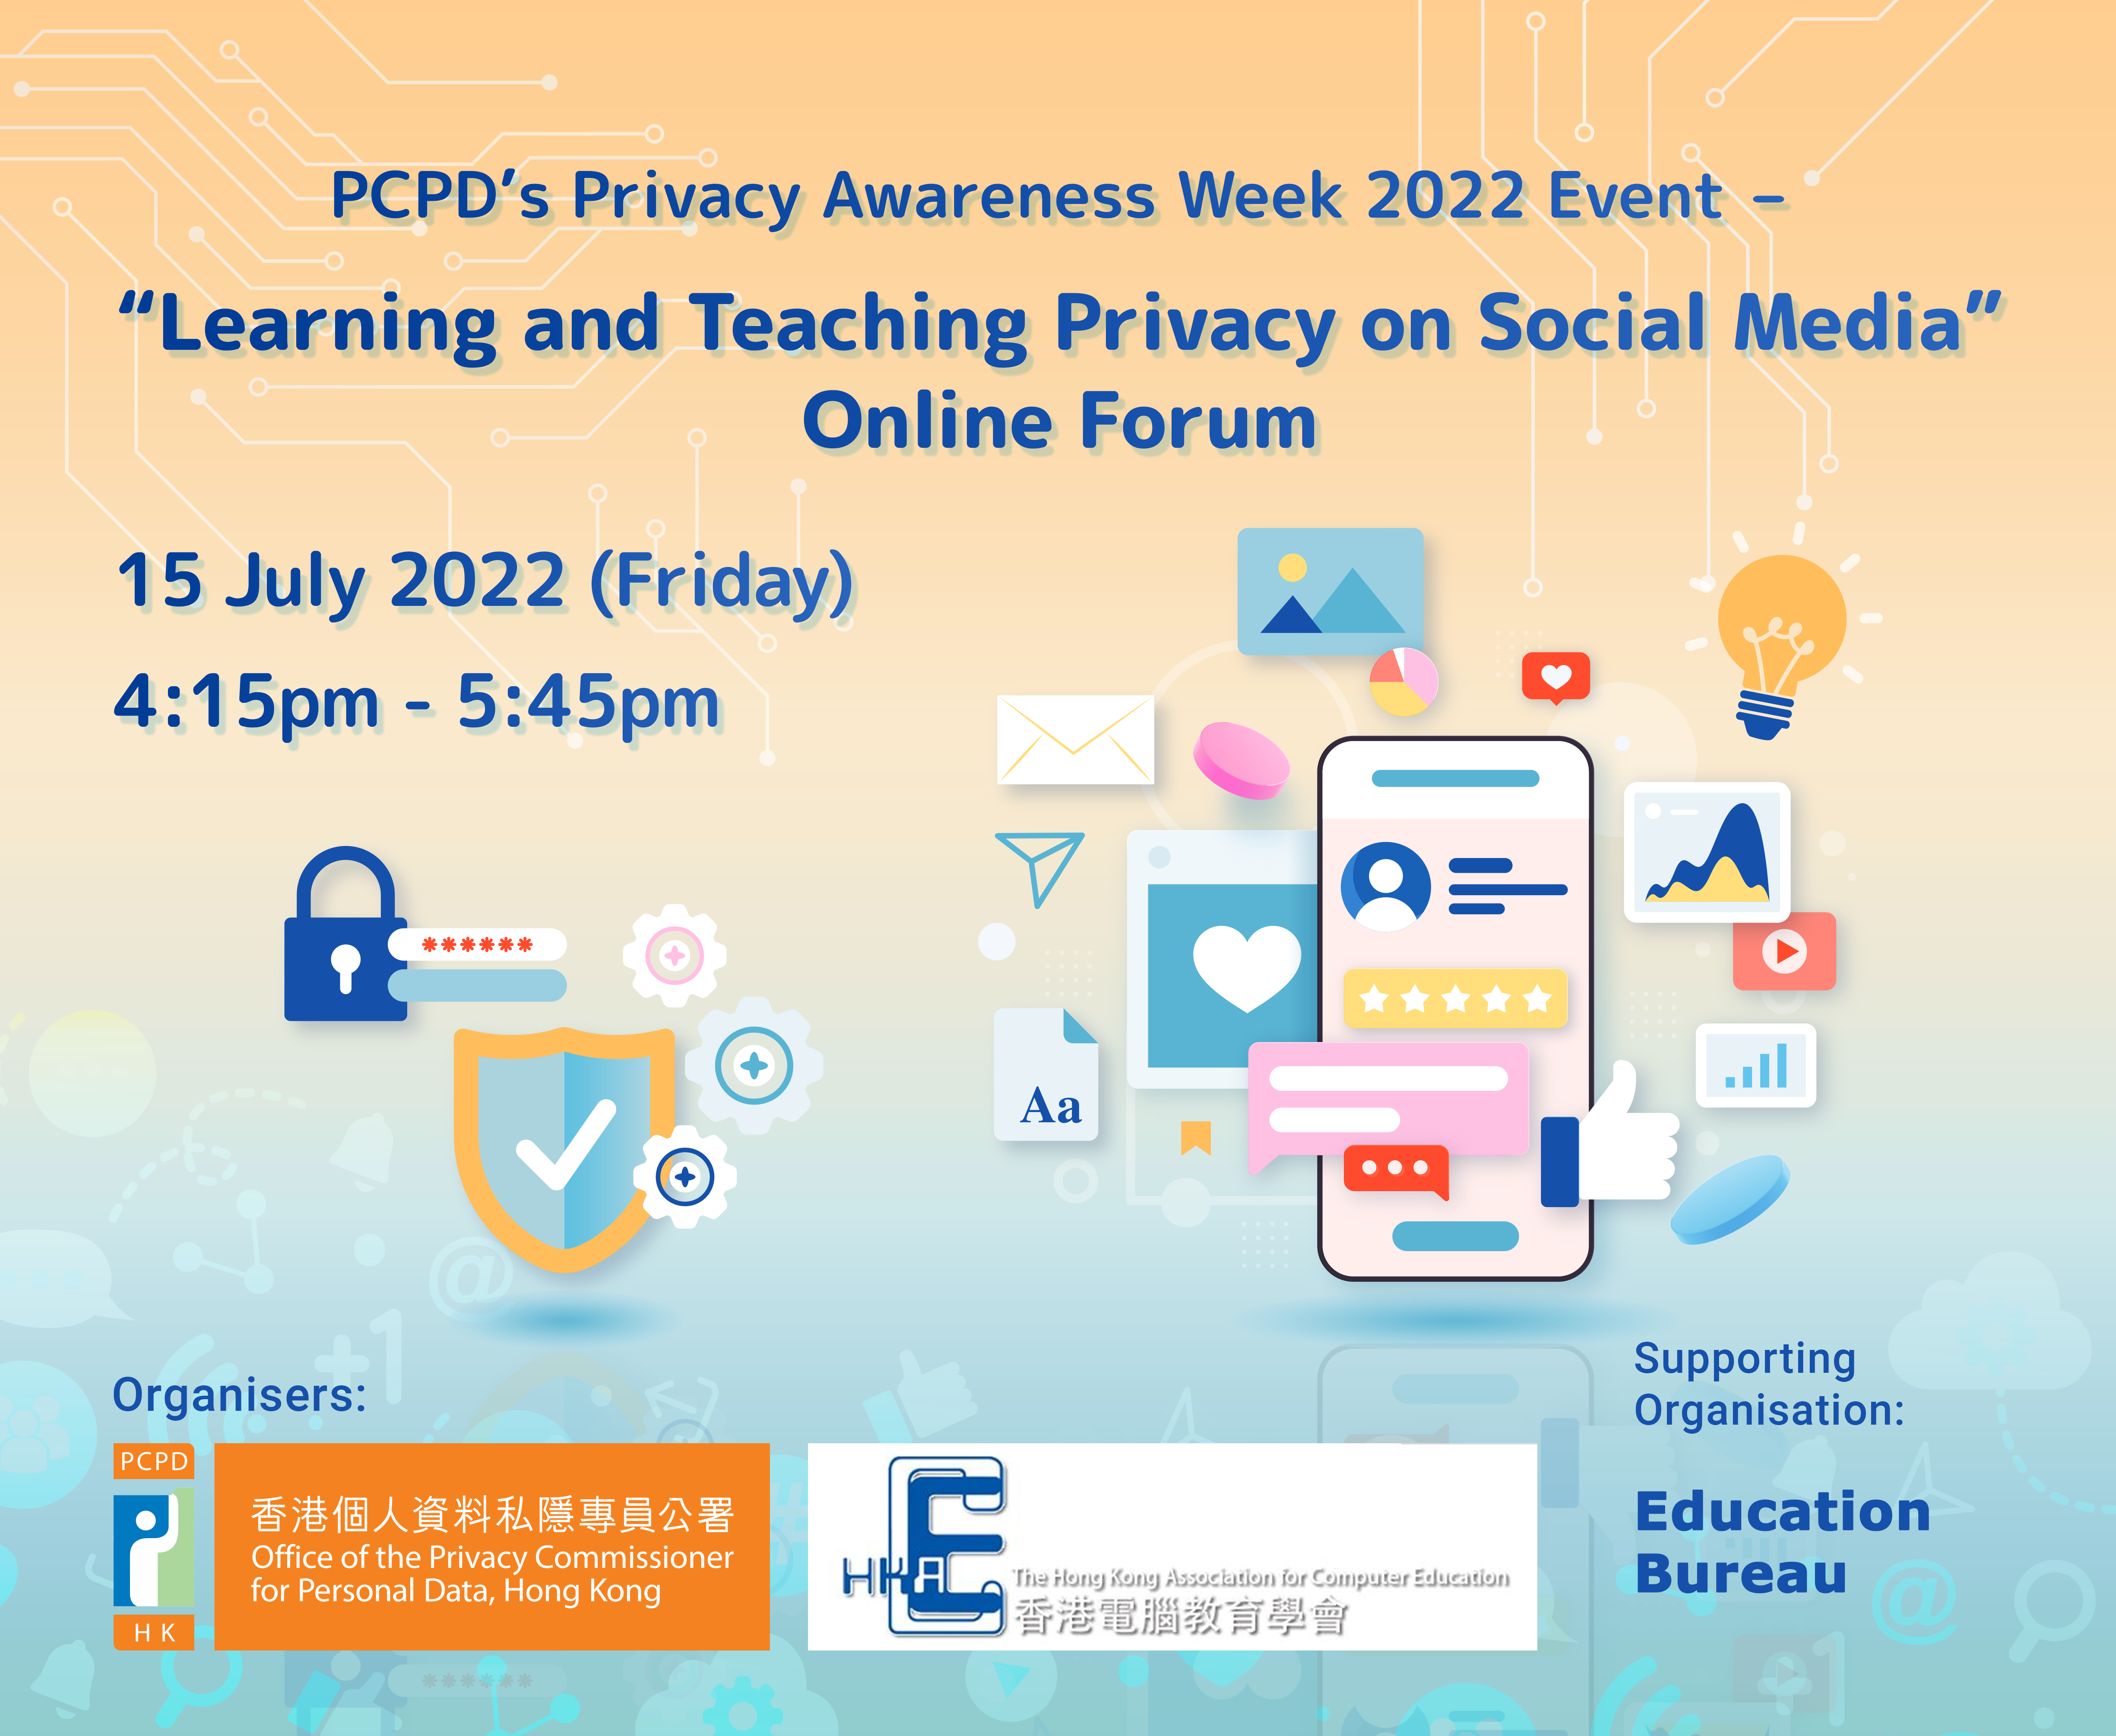 PCPD’s Privacy Awareness Week 2022 Event – “Learning and Teaching Privacy on Social Media” Online Forum